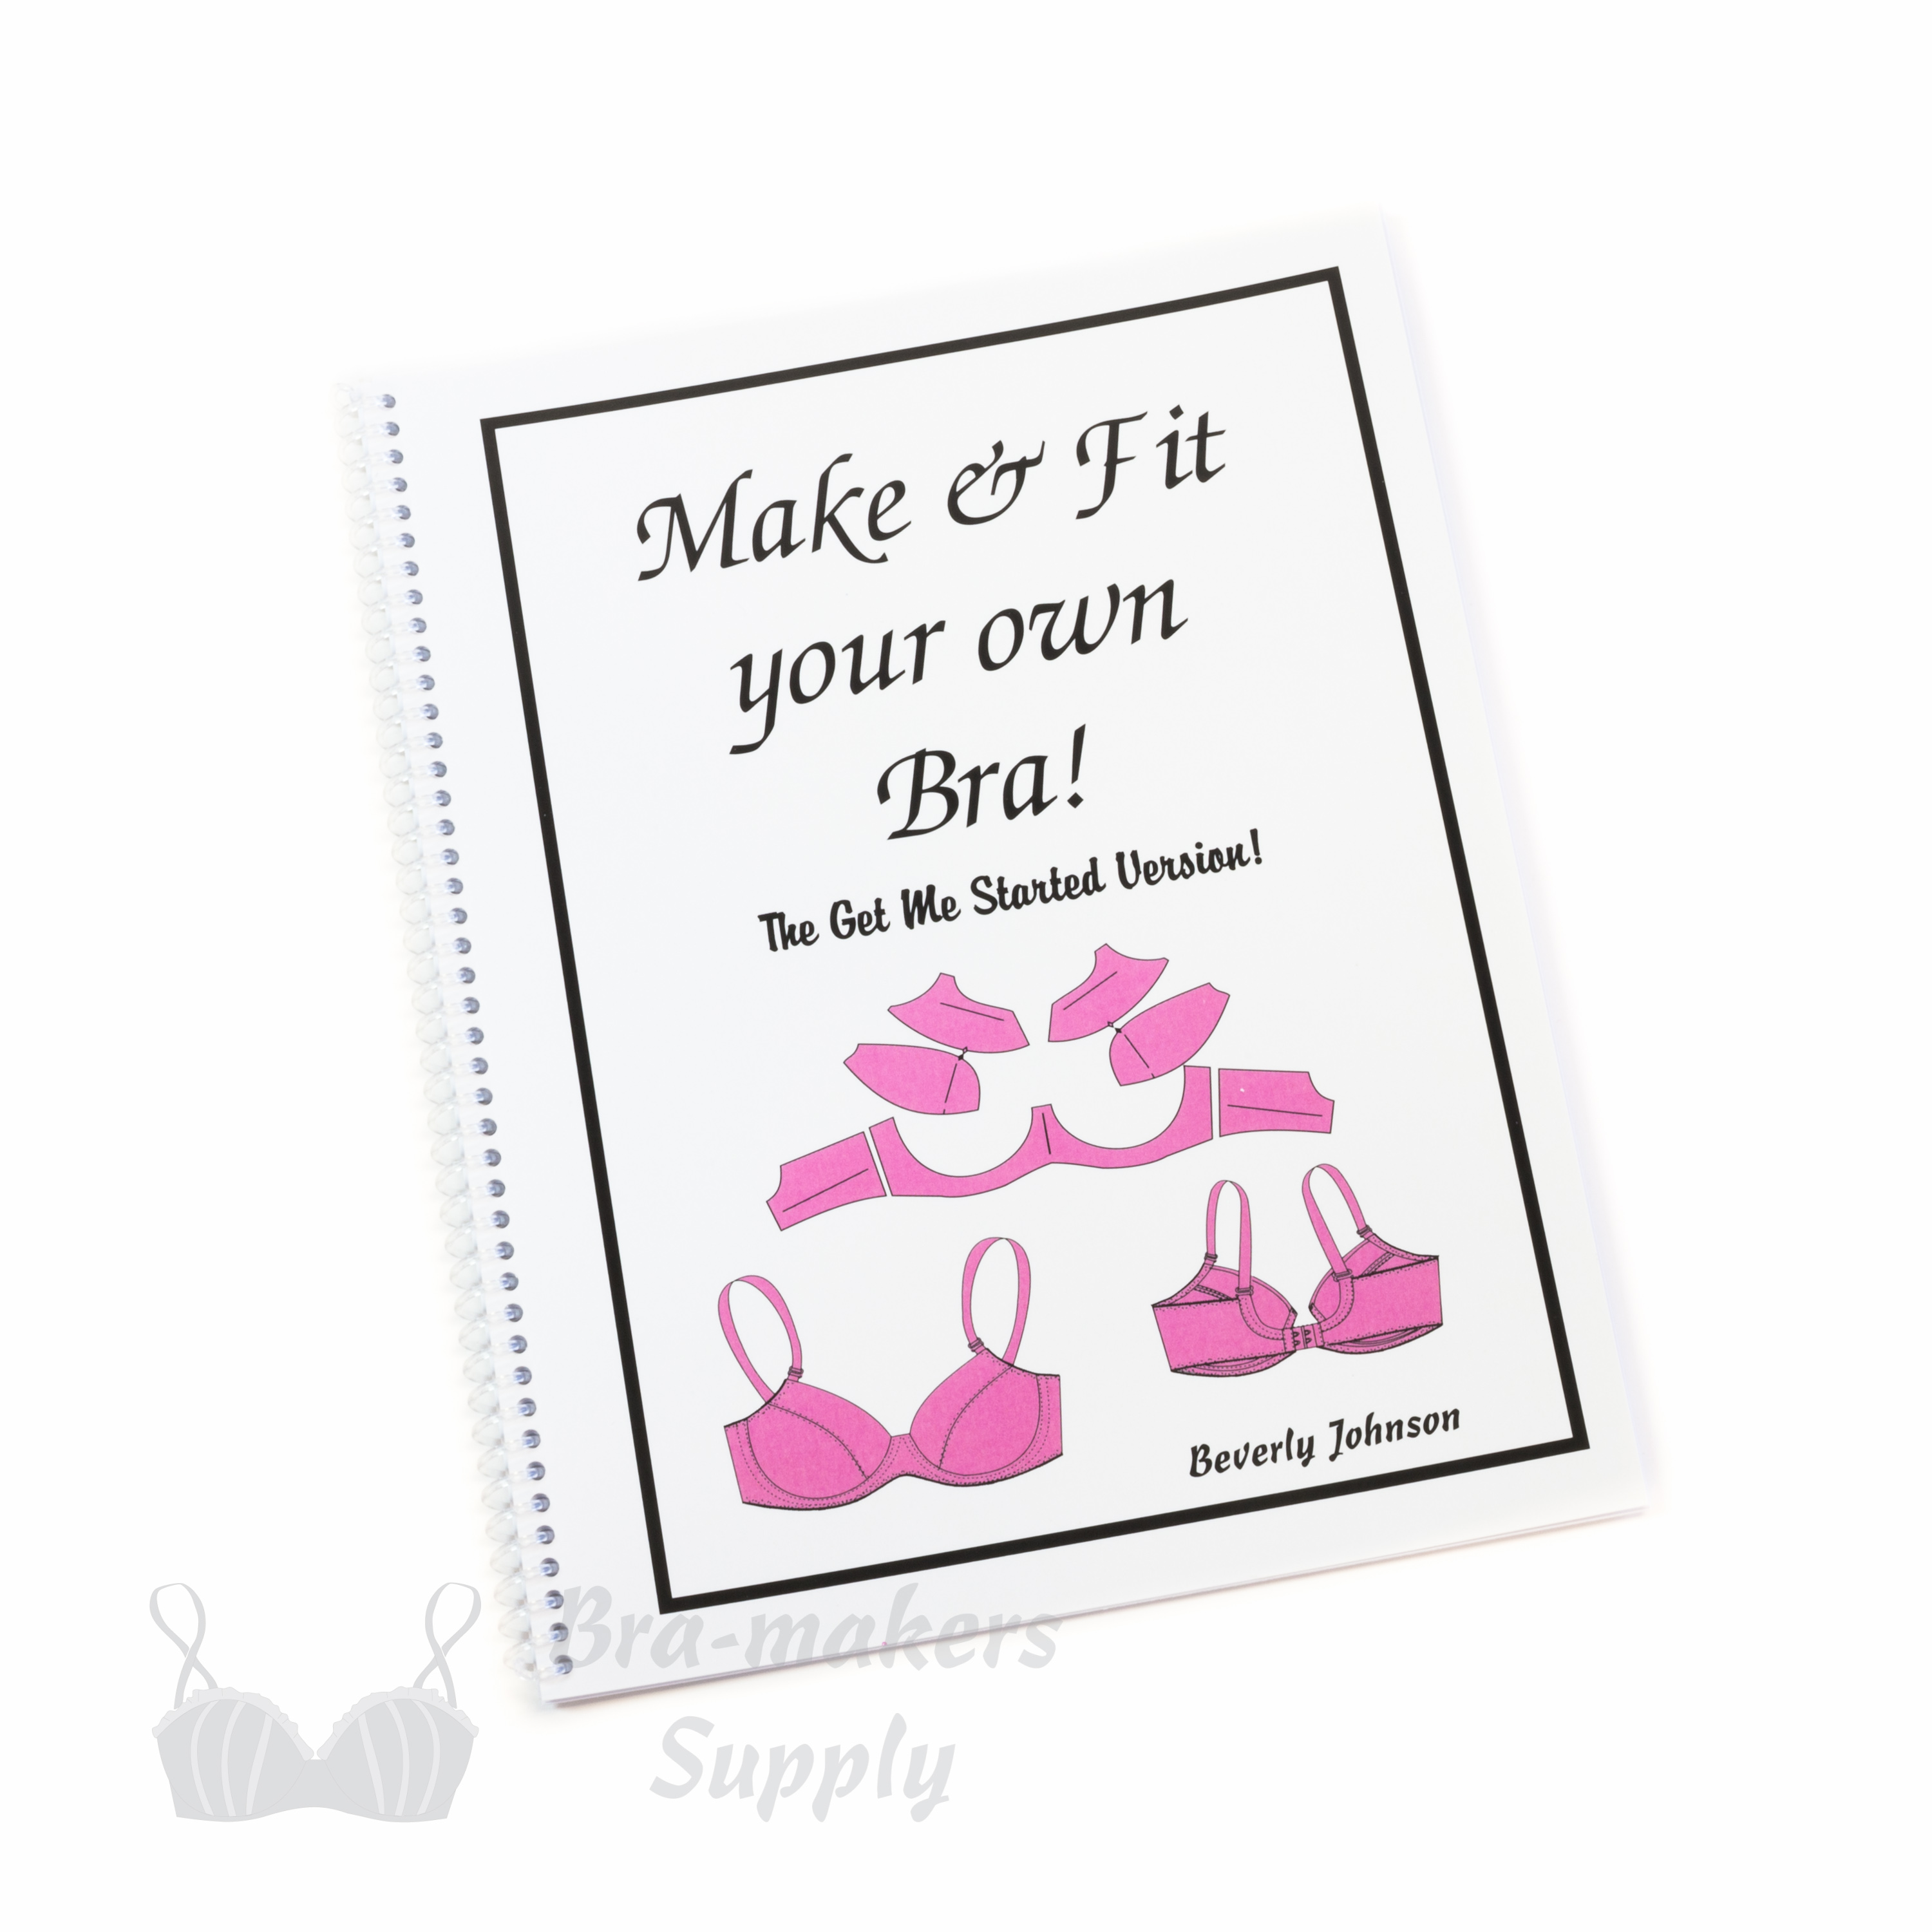 At Bra-makers Supply, we've got your back. Join us this month for